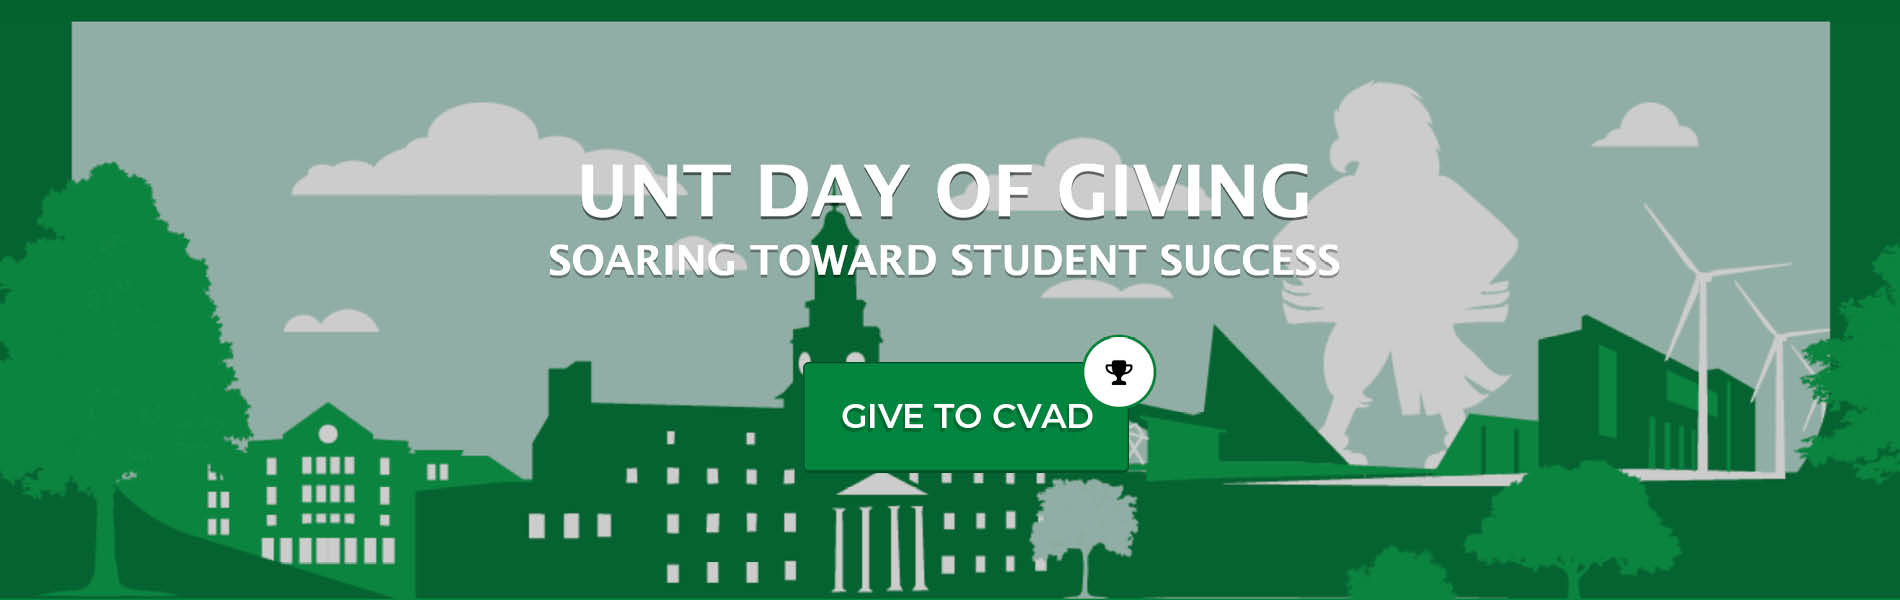 UNT Day of Giving, Give to CVAD